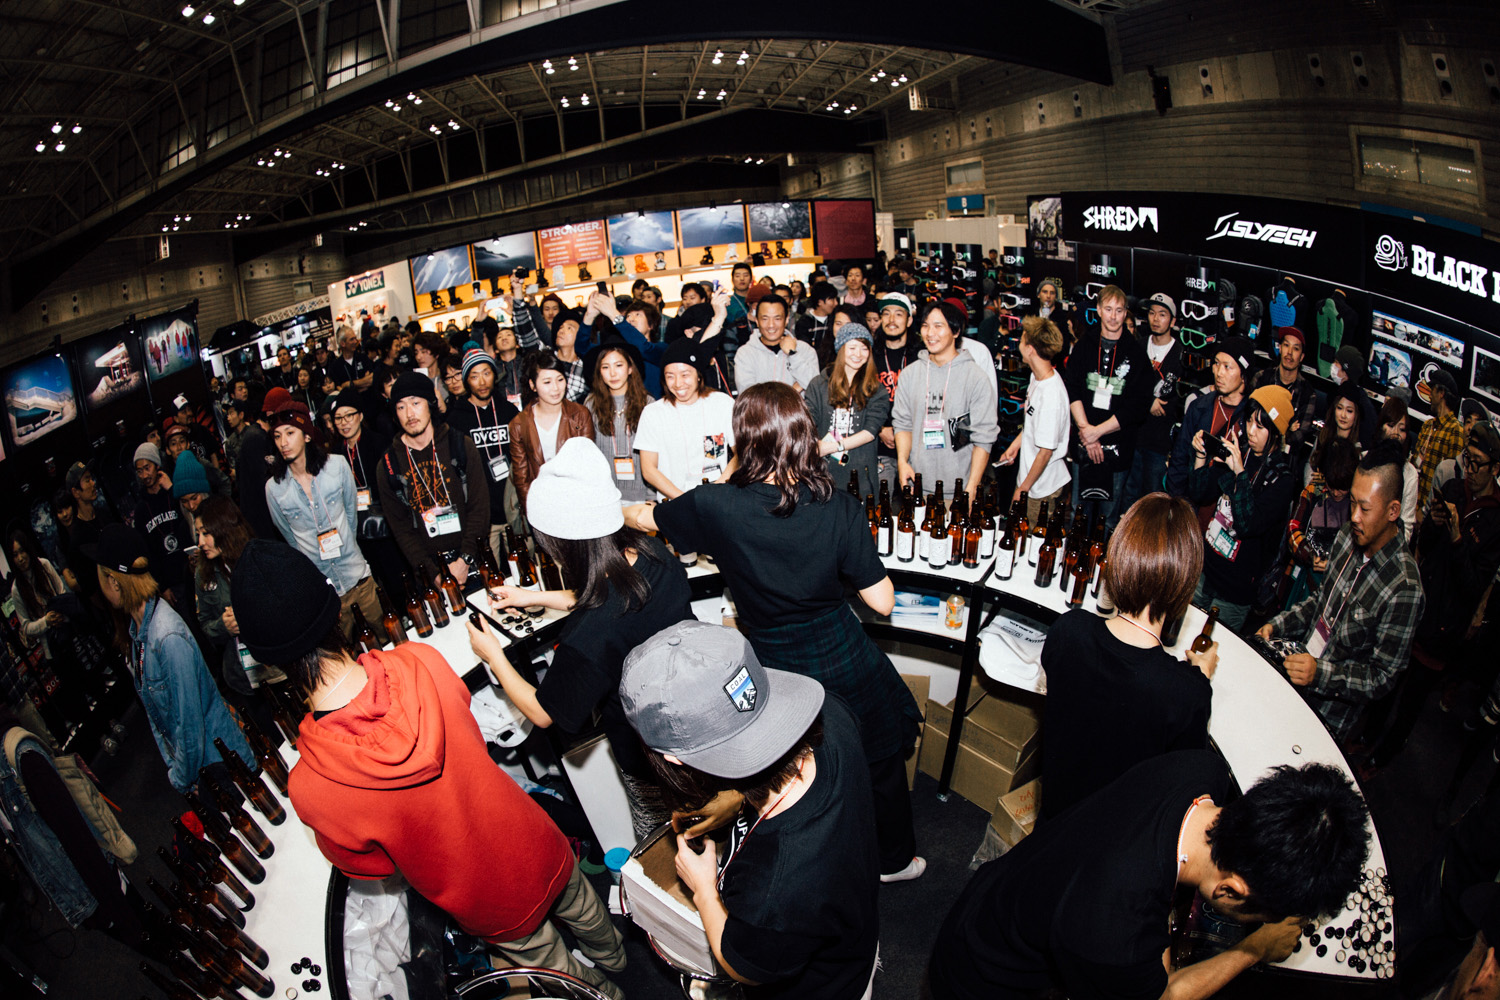 At the CAPiTA booth, which was the party venue, many shops, riders, and related parties from all over the country gathered and the topic of snowboarding was endless.